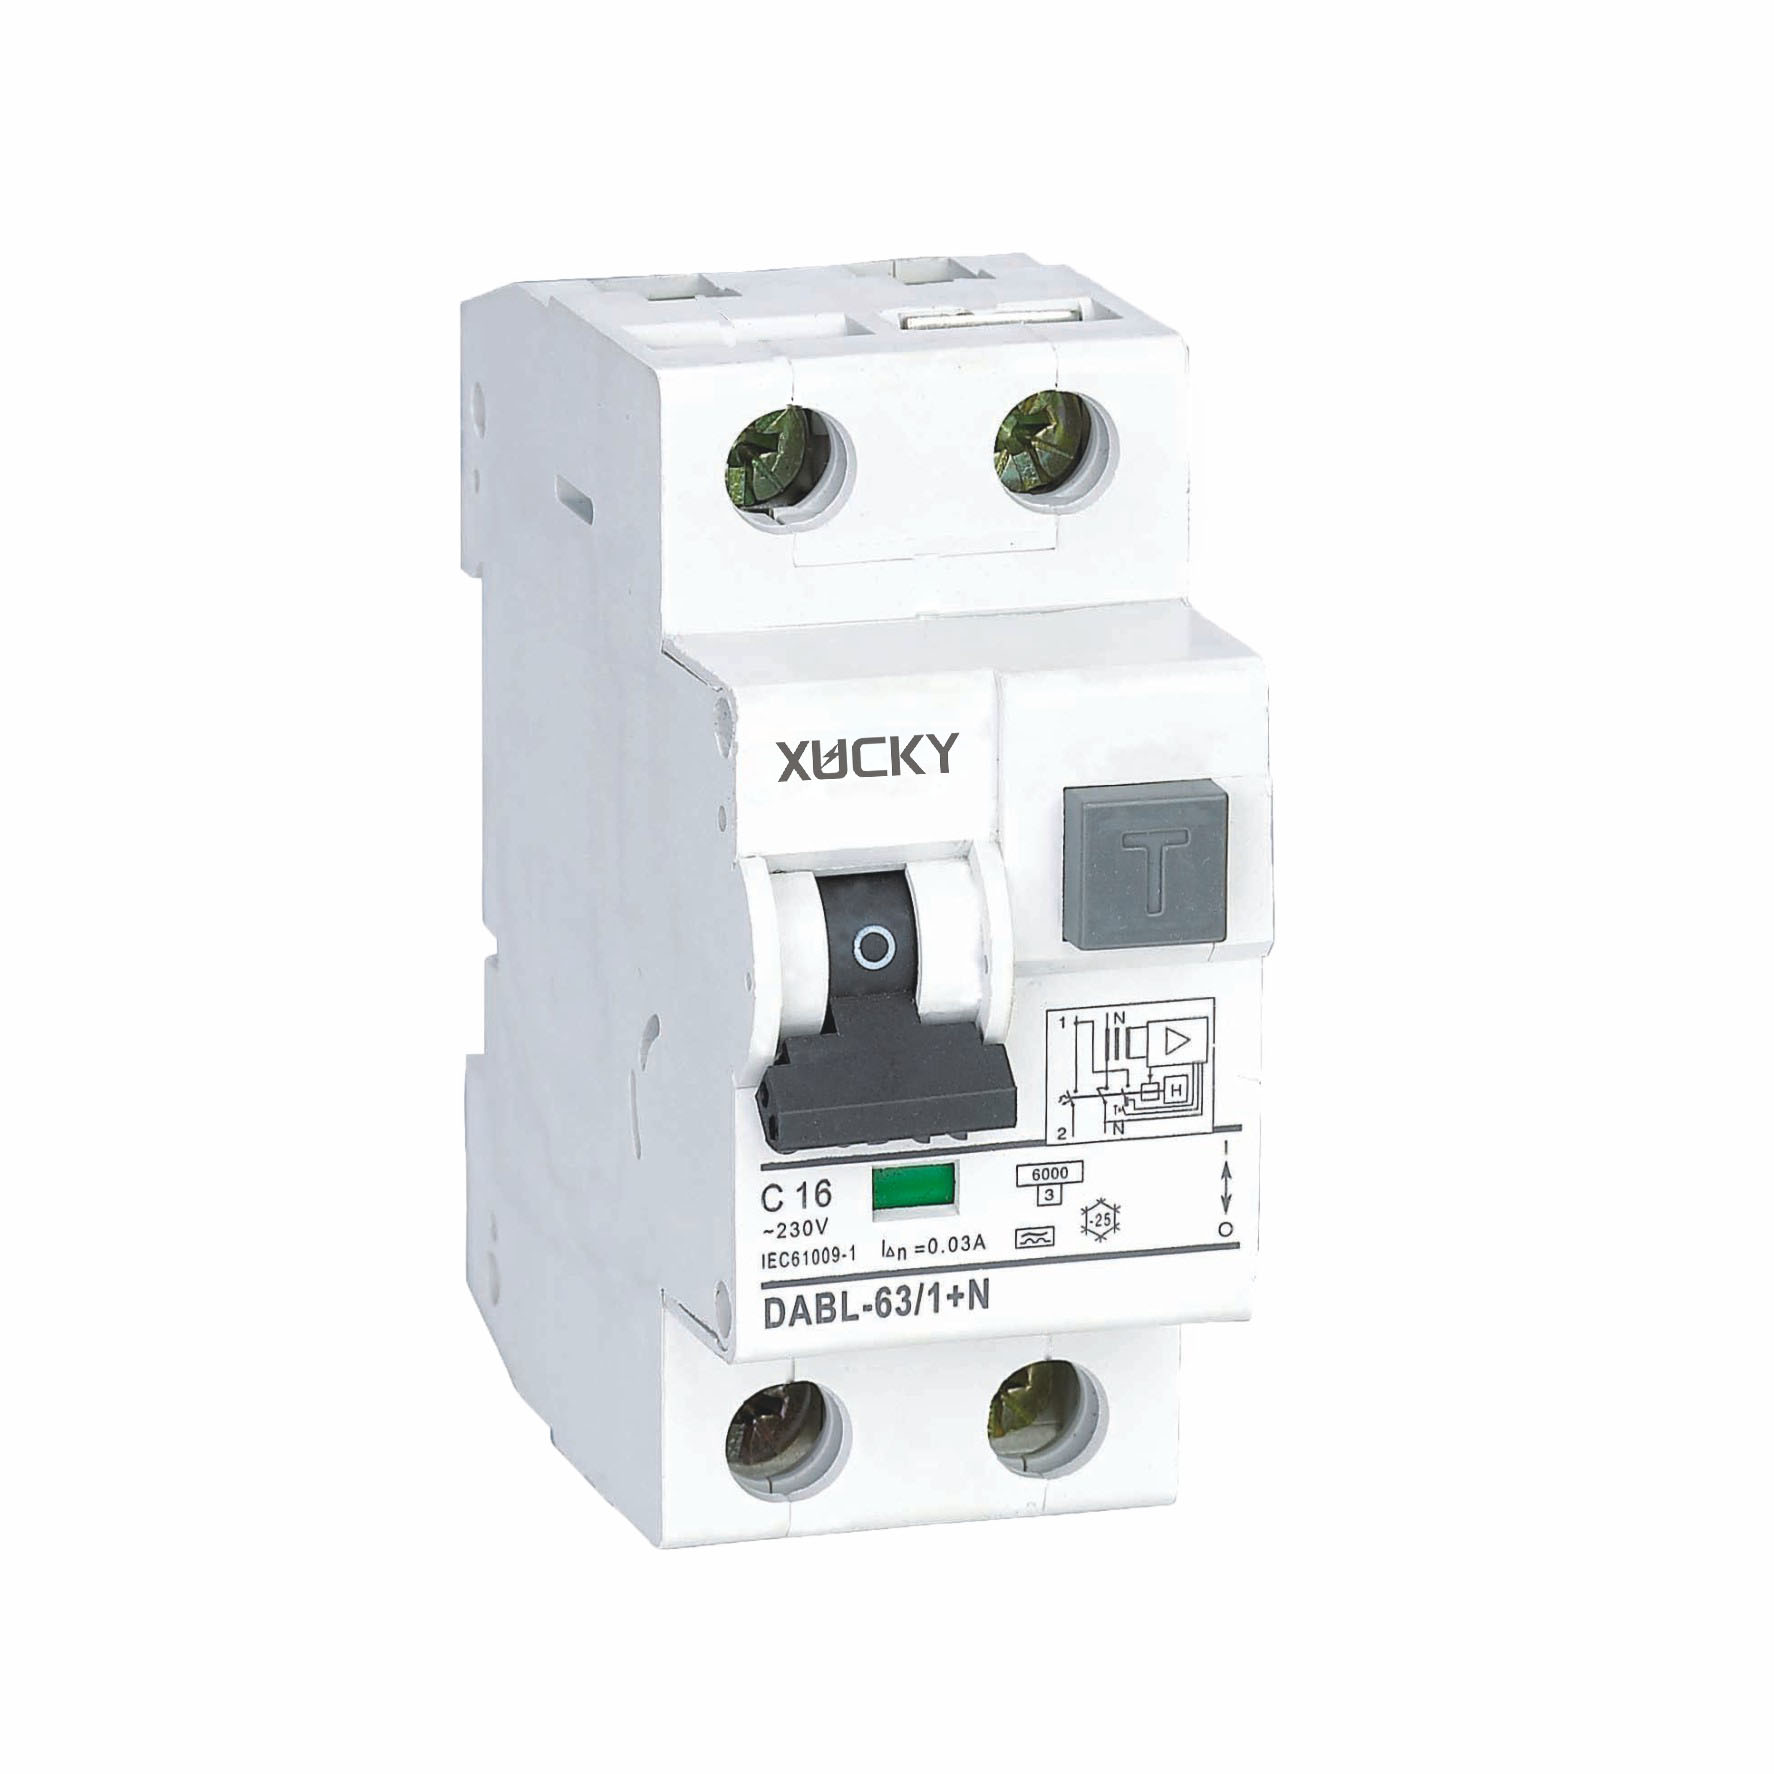 https://www.xucky.com/bl-63-series-residual-current-operated-circuit-breakers-with-overcurrent-protection-product/